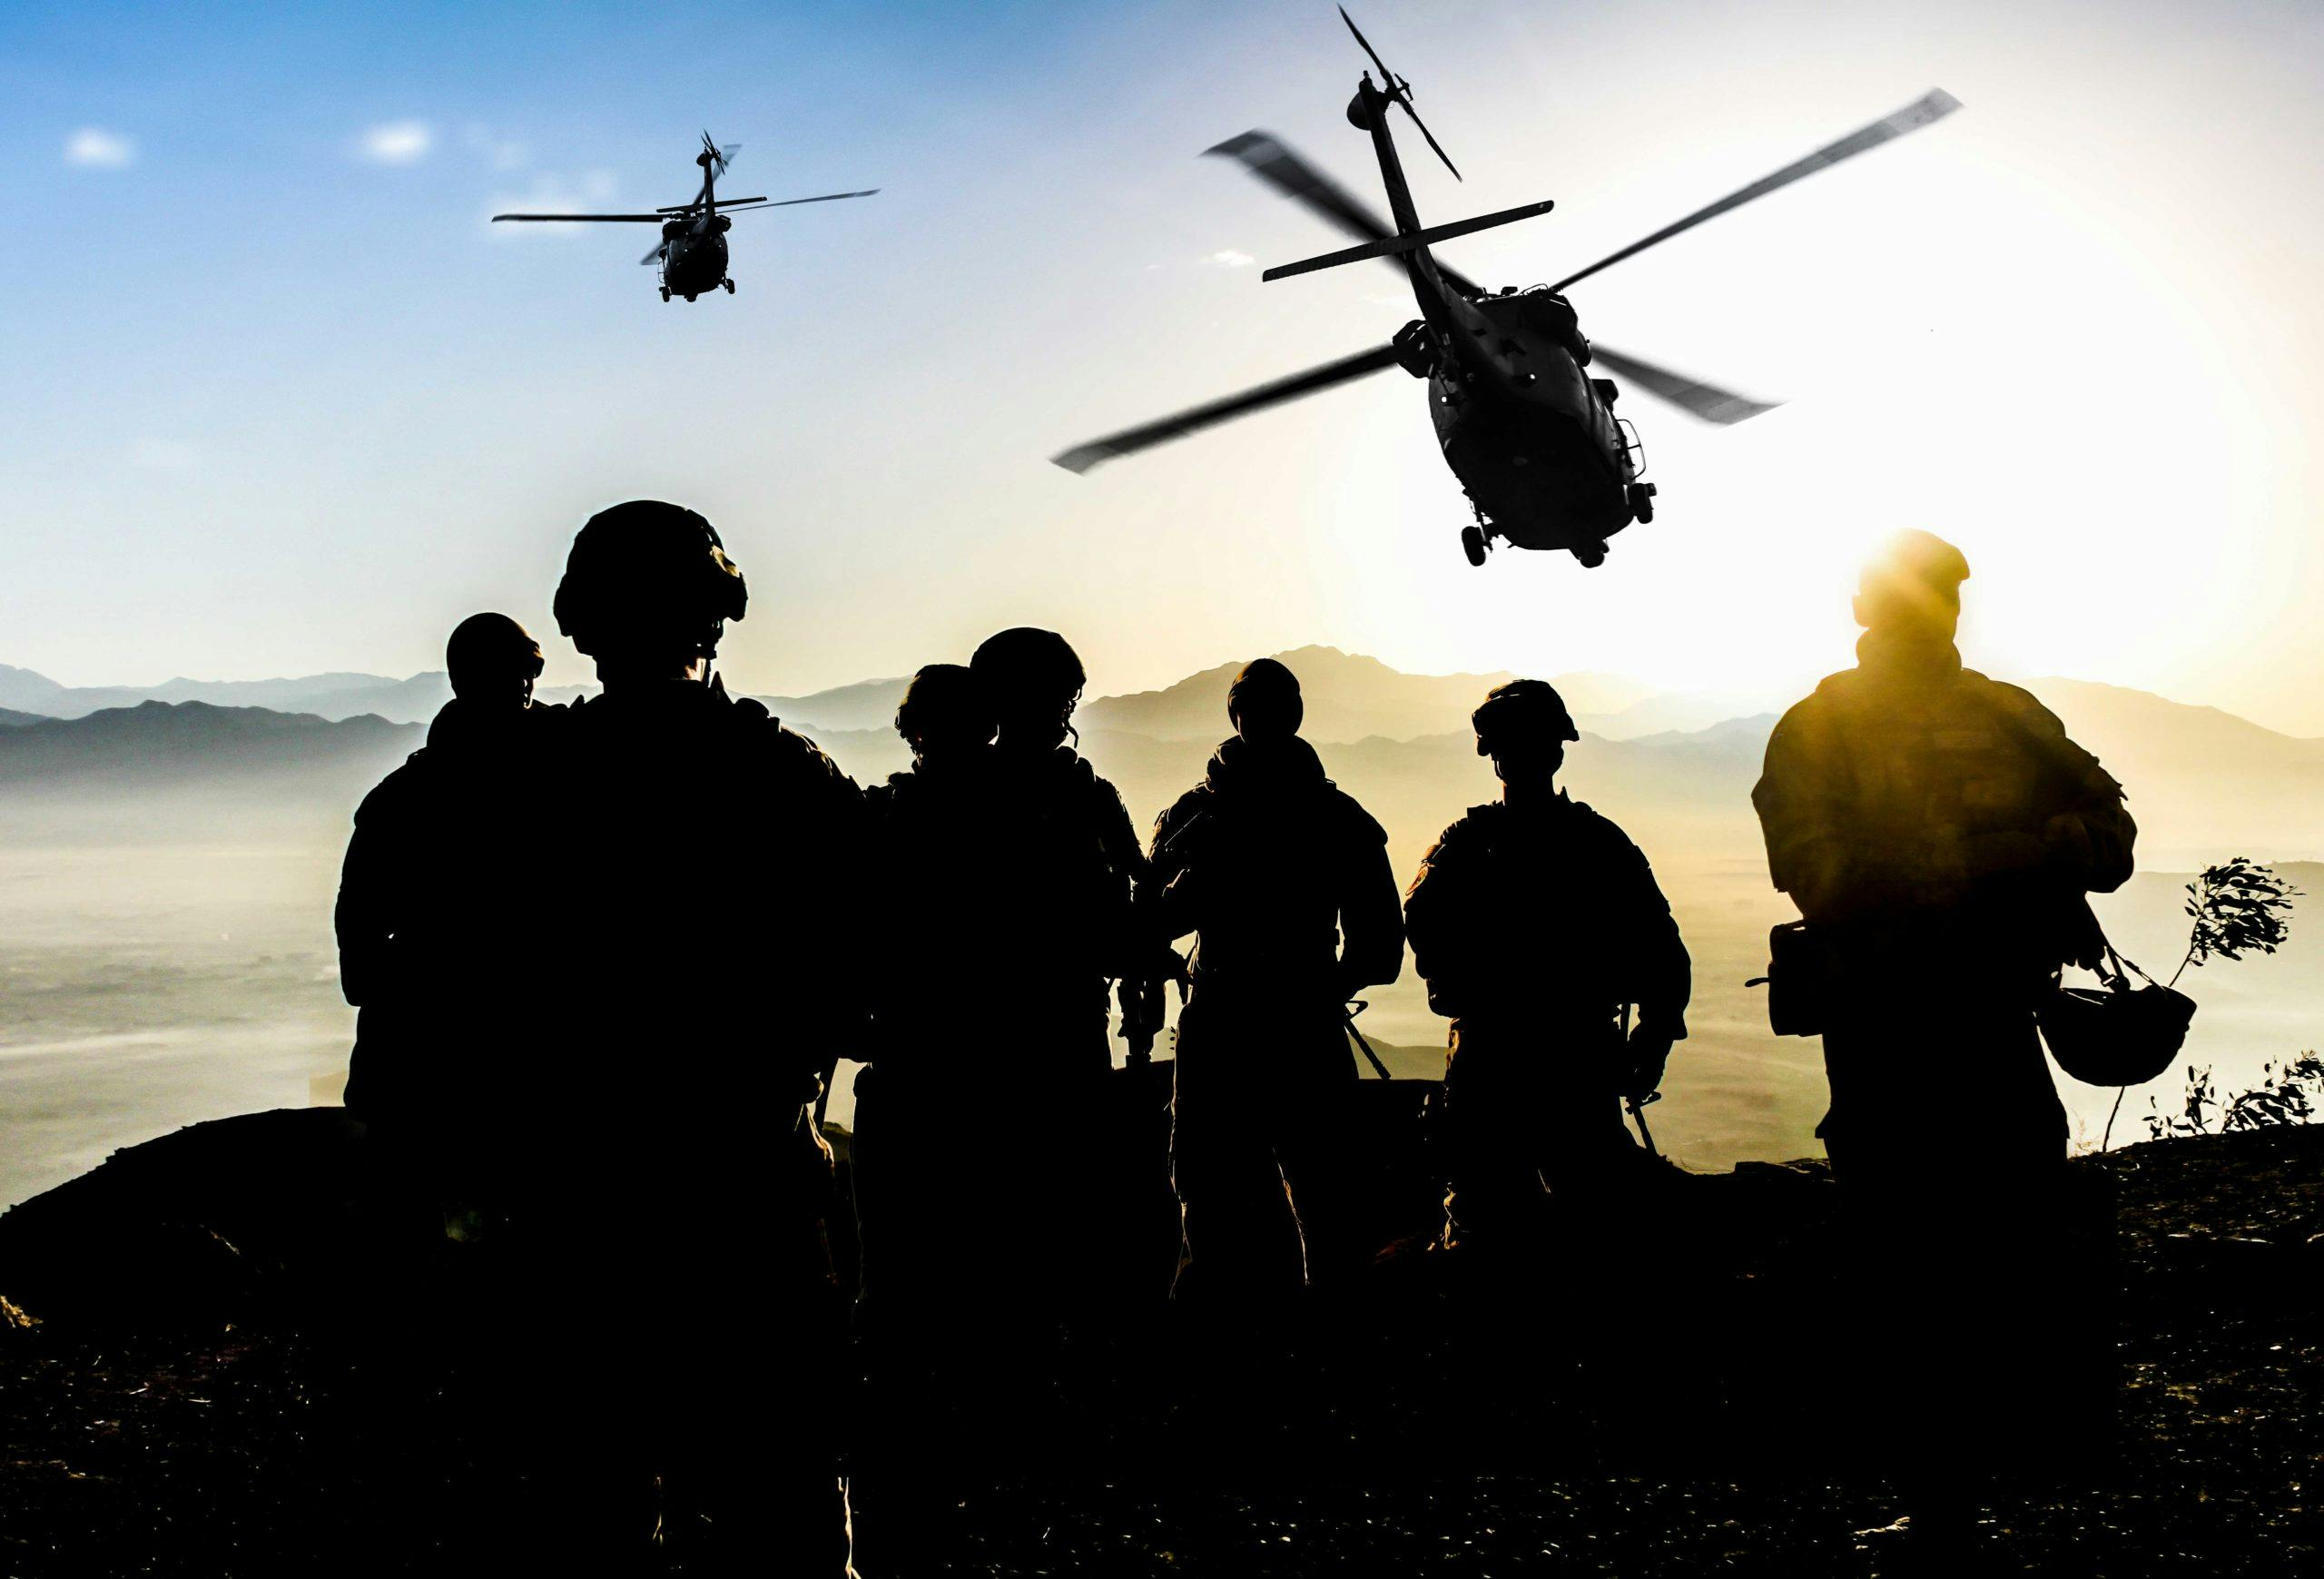 Image showing silhouettes of soldiers atop a mountain with the sun in the background and two helicopters flying in towards them. Related to: deployable communications kits, scalable communications kits, DOD compliance, warfighter communications kits, remote connectivity, deployed warfighters connectivity